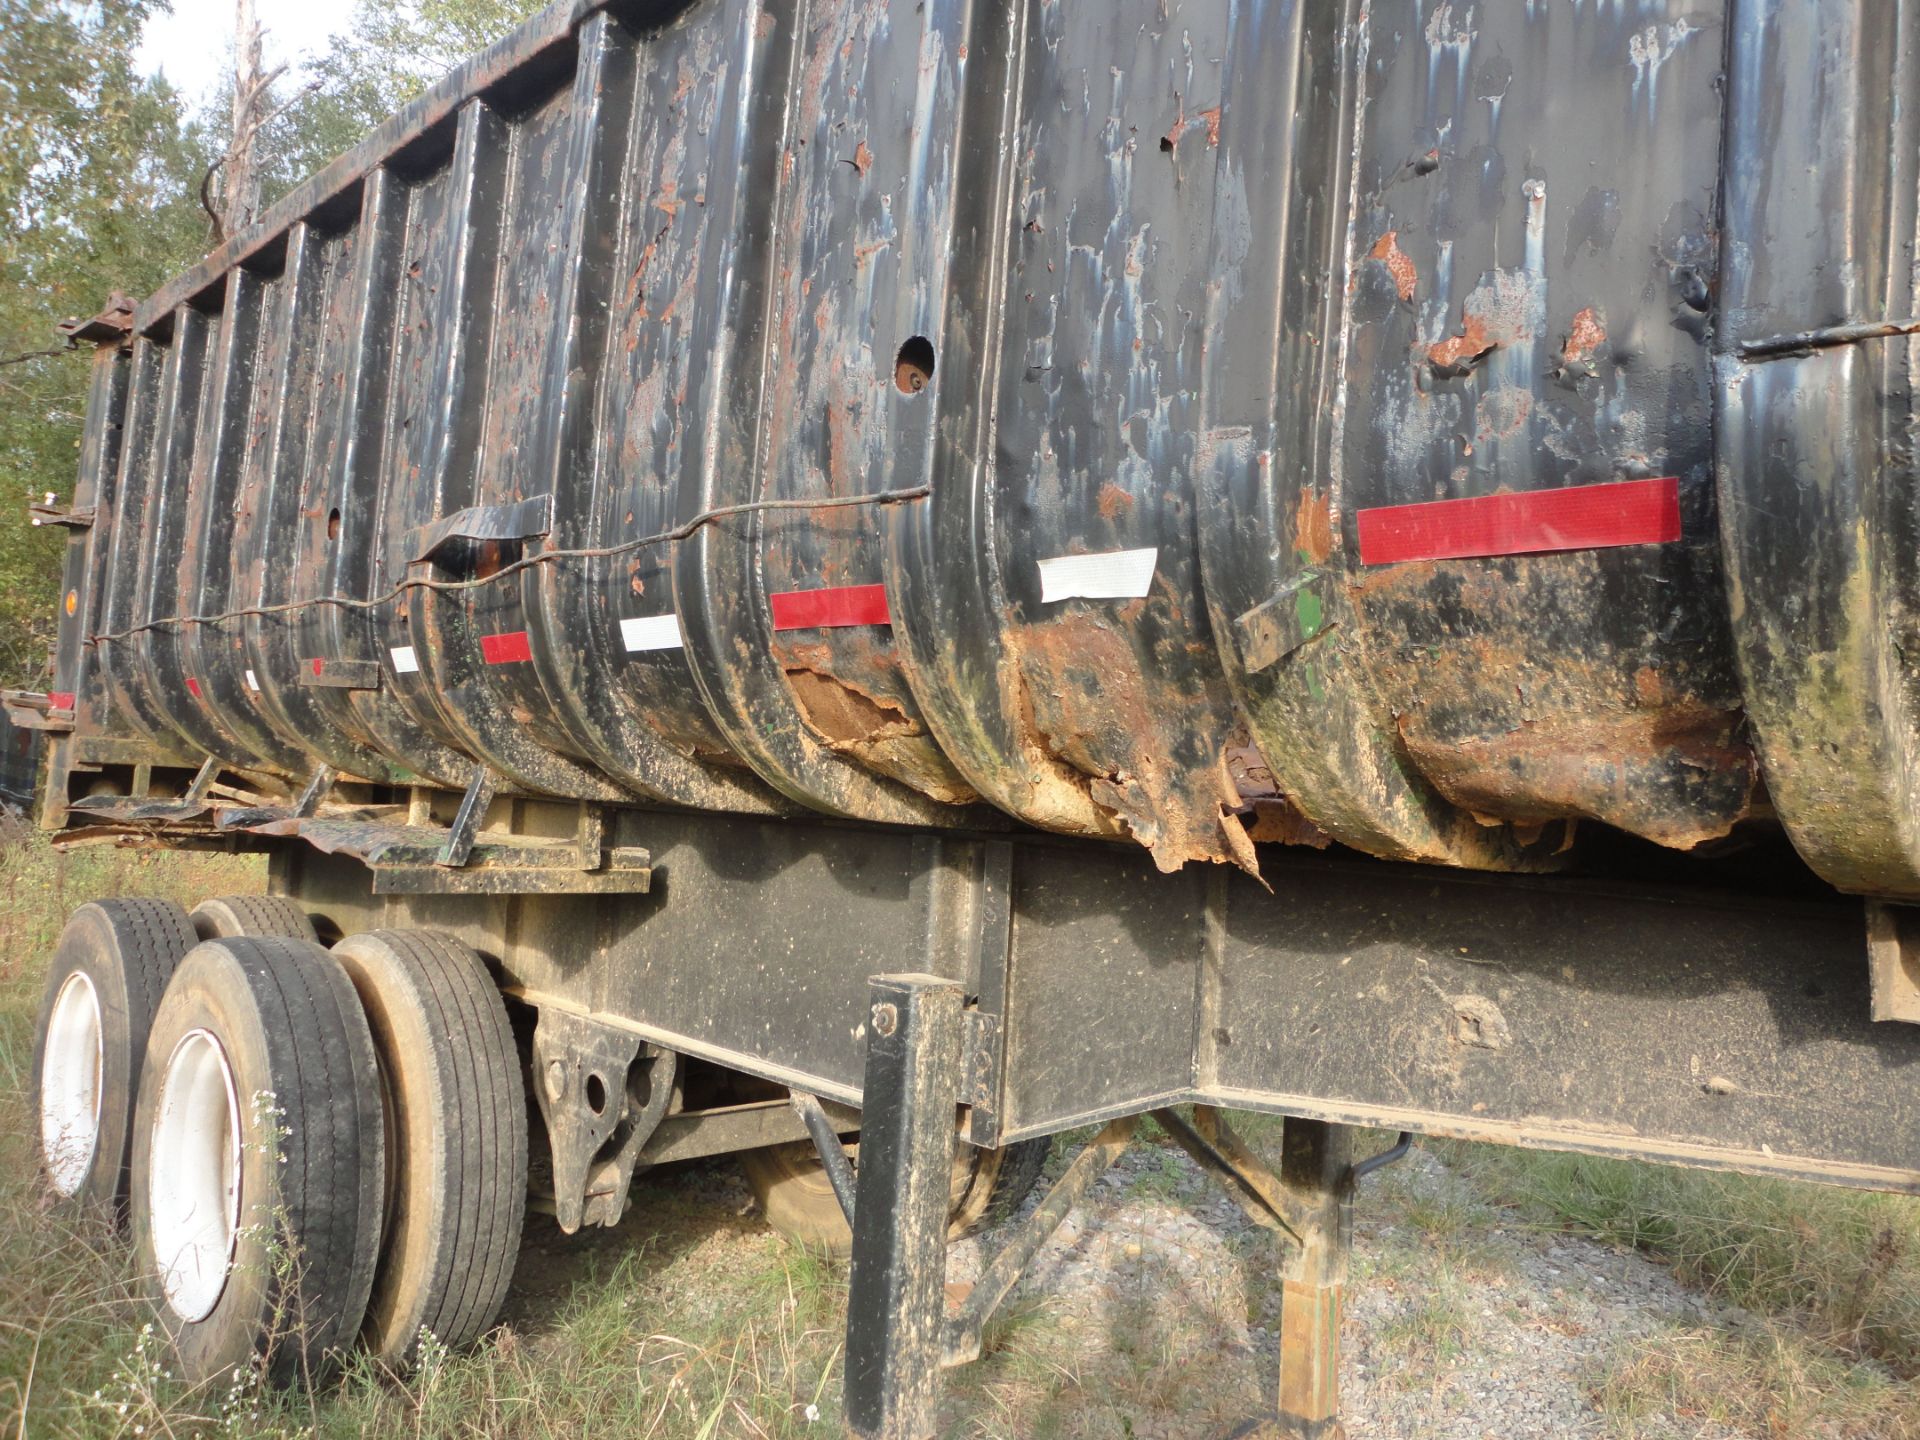 21' LONG X 5" SIDES APPROX. MFG. UNKNOWN HYDRAULIC TANDEM AXLE U-SHAPED STEEL BED DUMP TRAILER; - Image 4 of 6